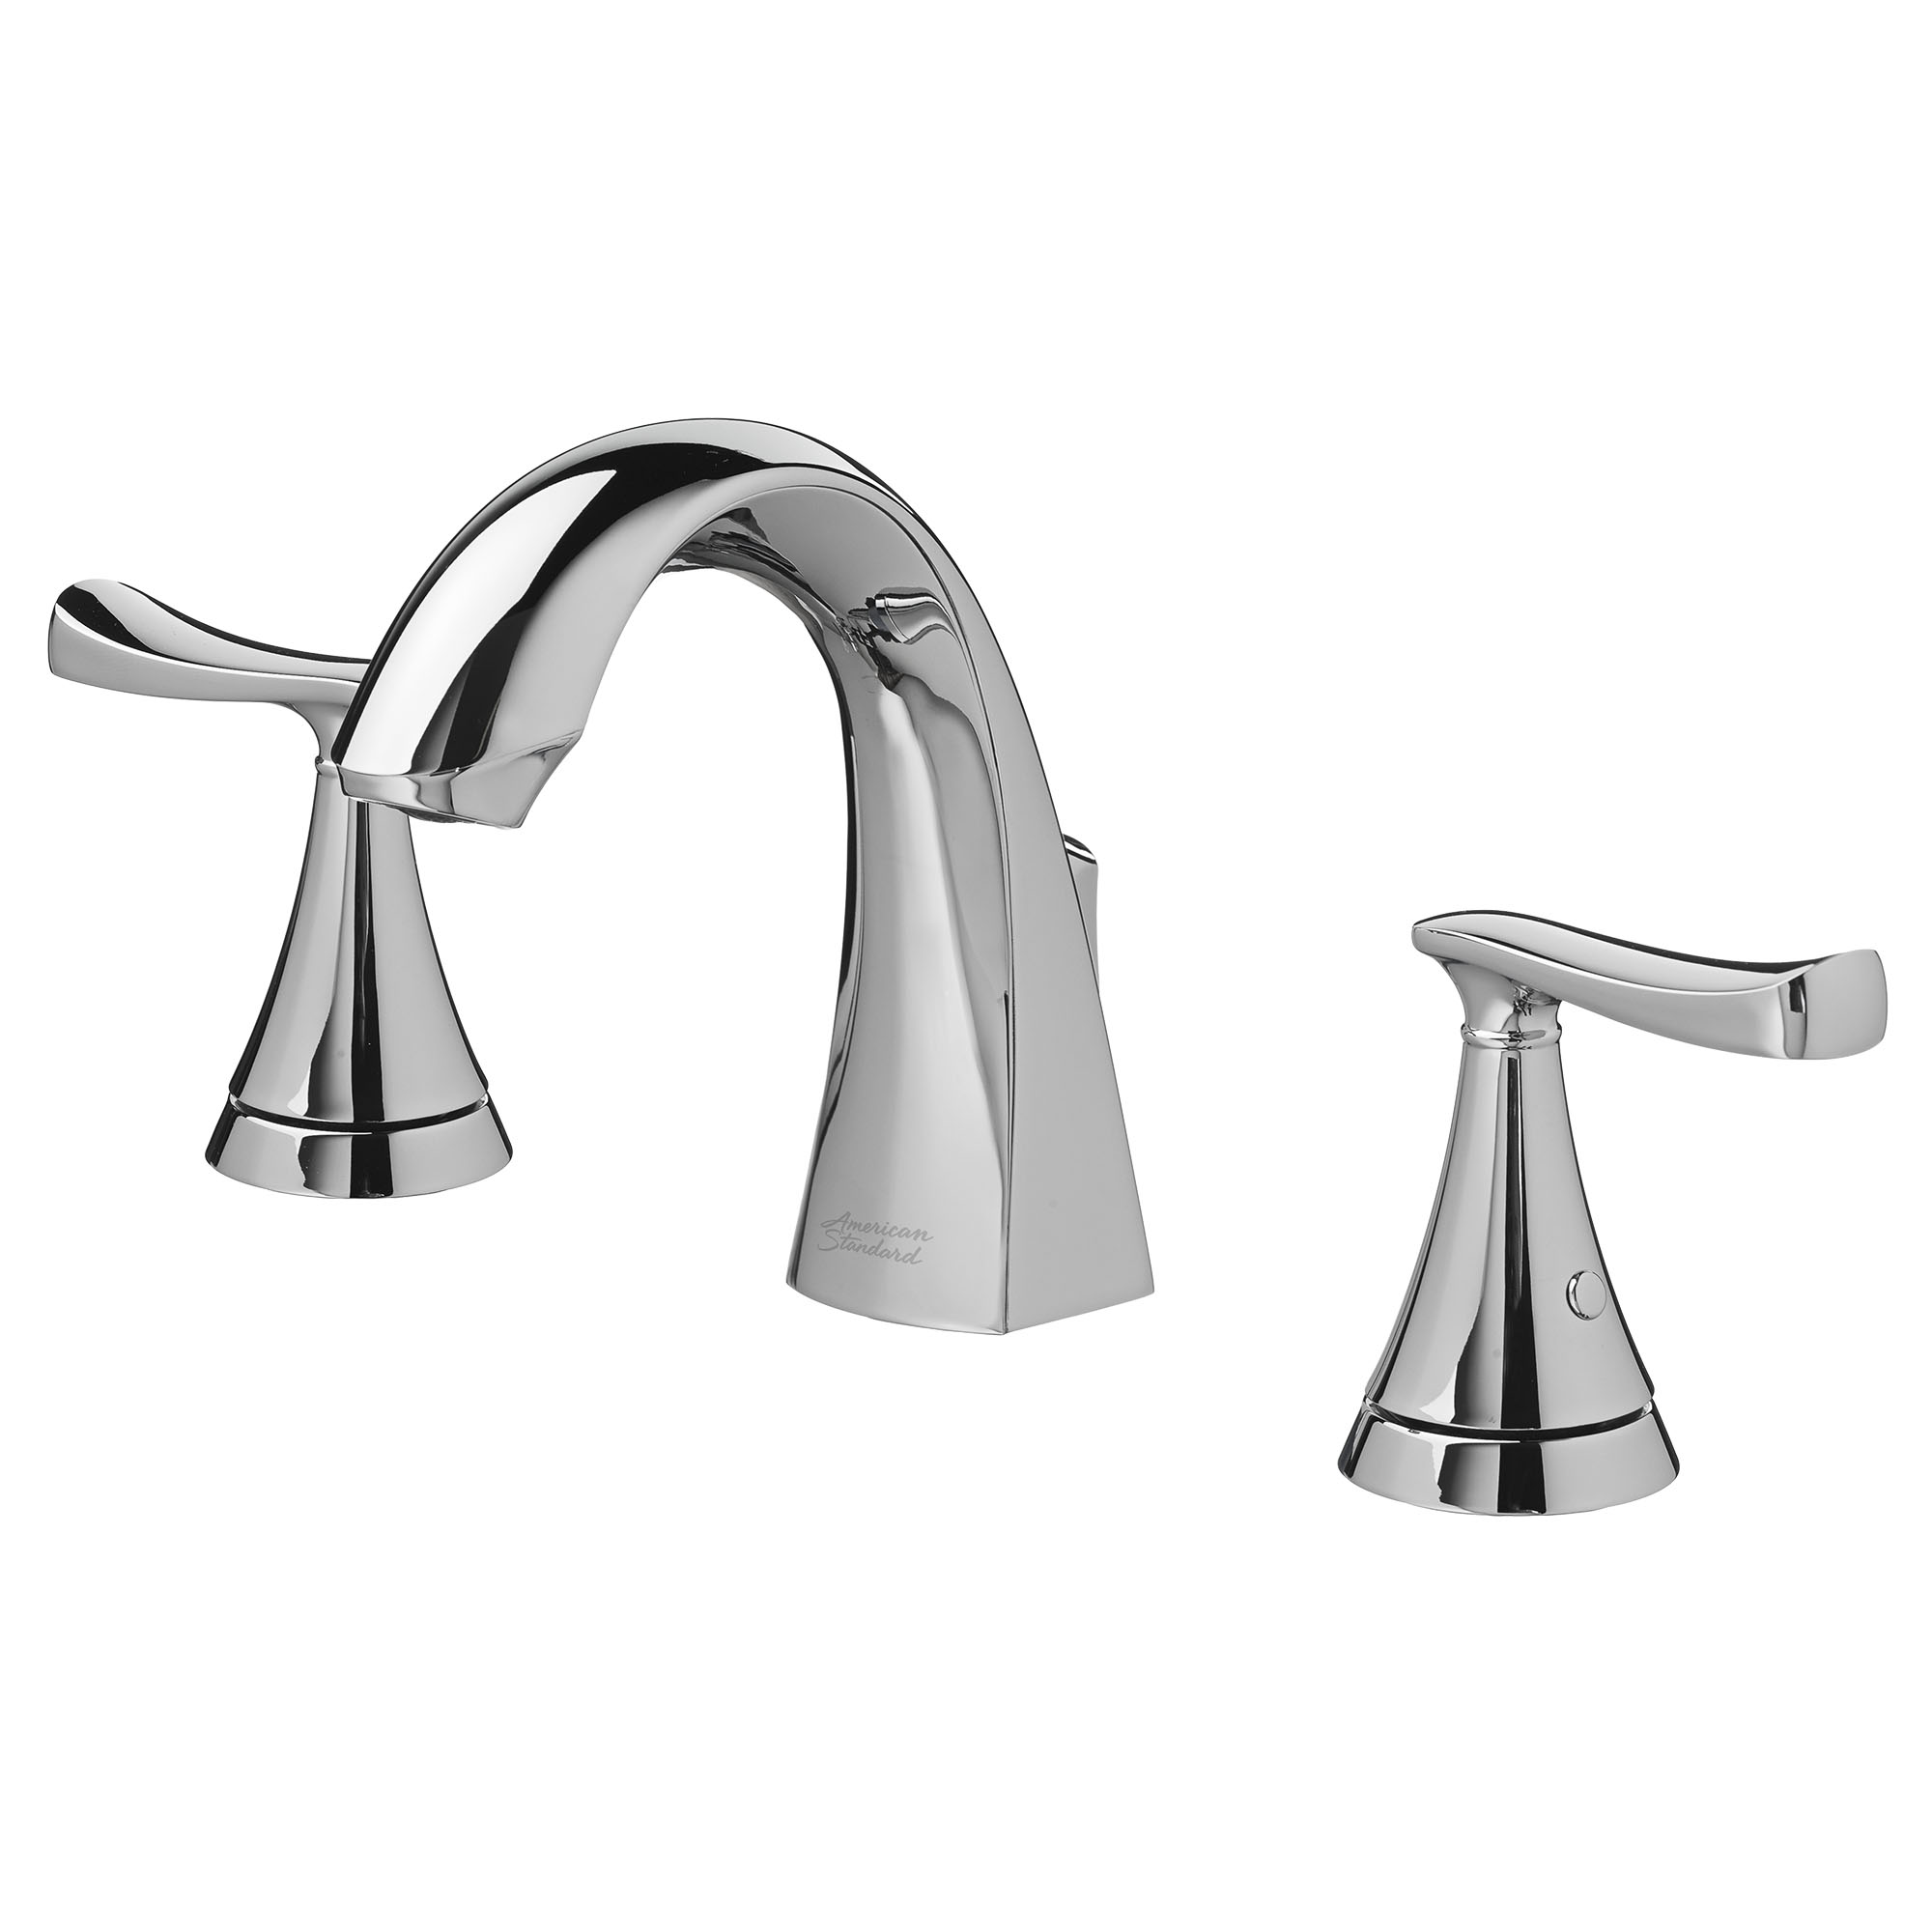 Chatfield® 8-Inch Widespread 2-Handle Bathroom Faucet 1.2 gpm/4.5 L/min With Lever Handles